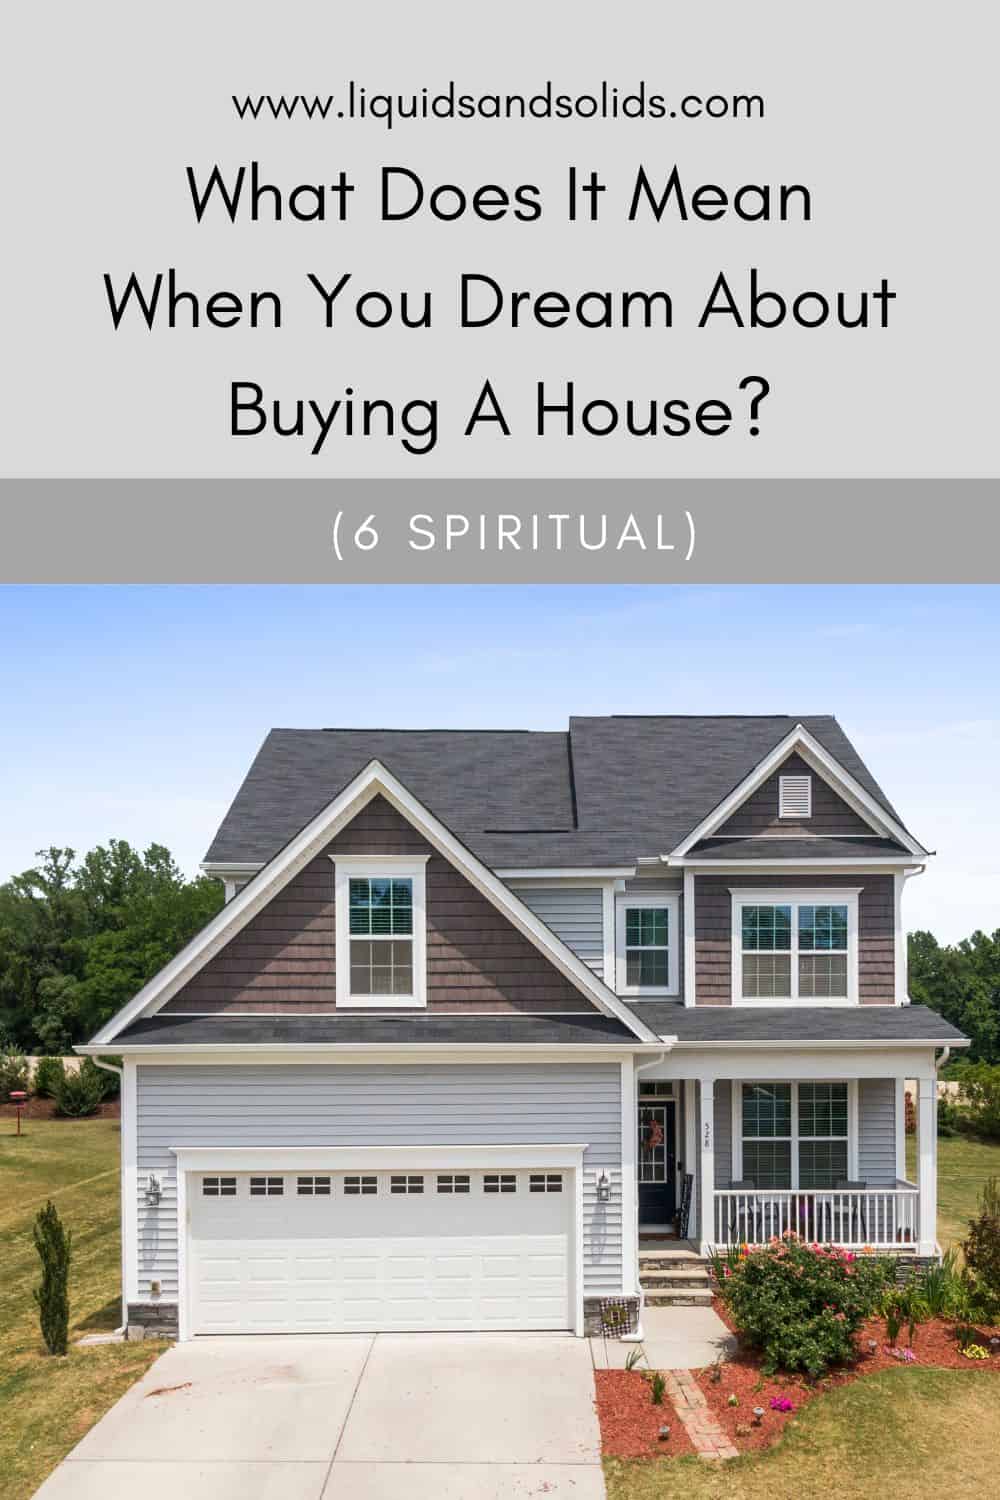 dream about buying a house meaning